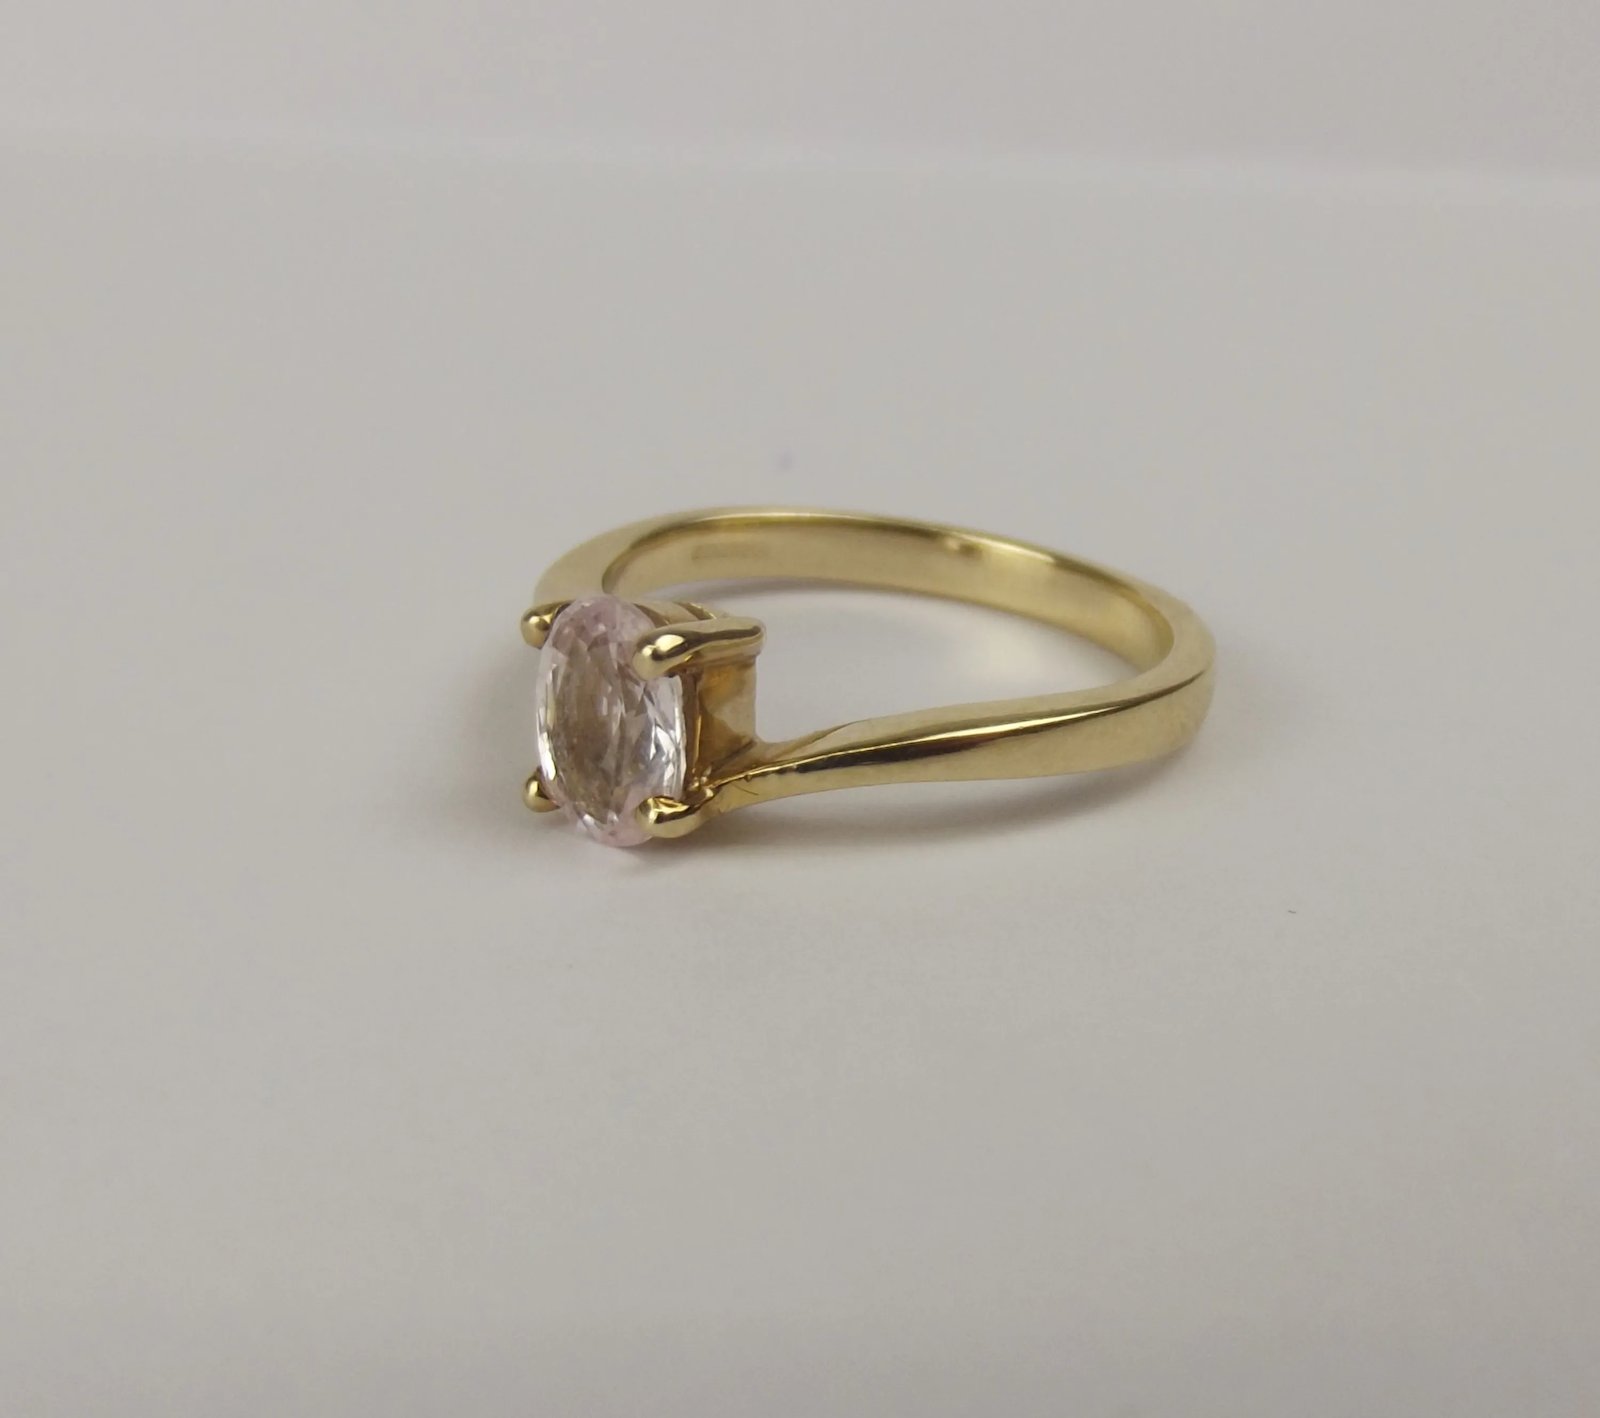 9ct Yellow Gold White Sapphire Ring UK Size N US 6 ½ Sally Antiques